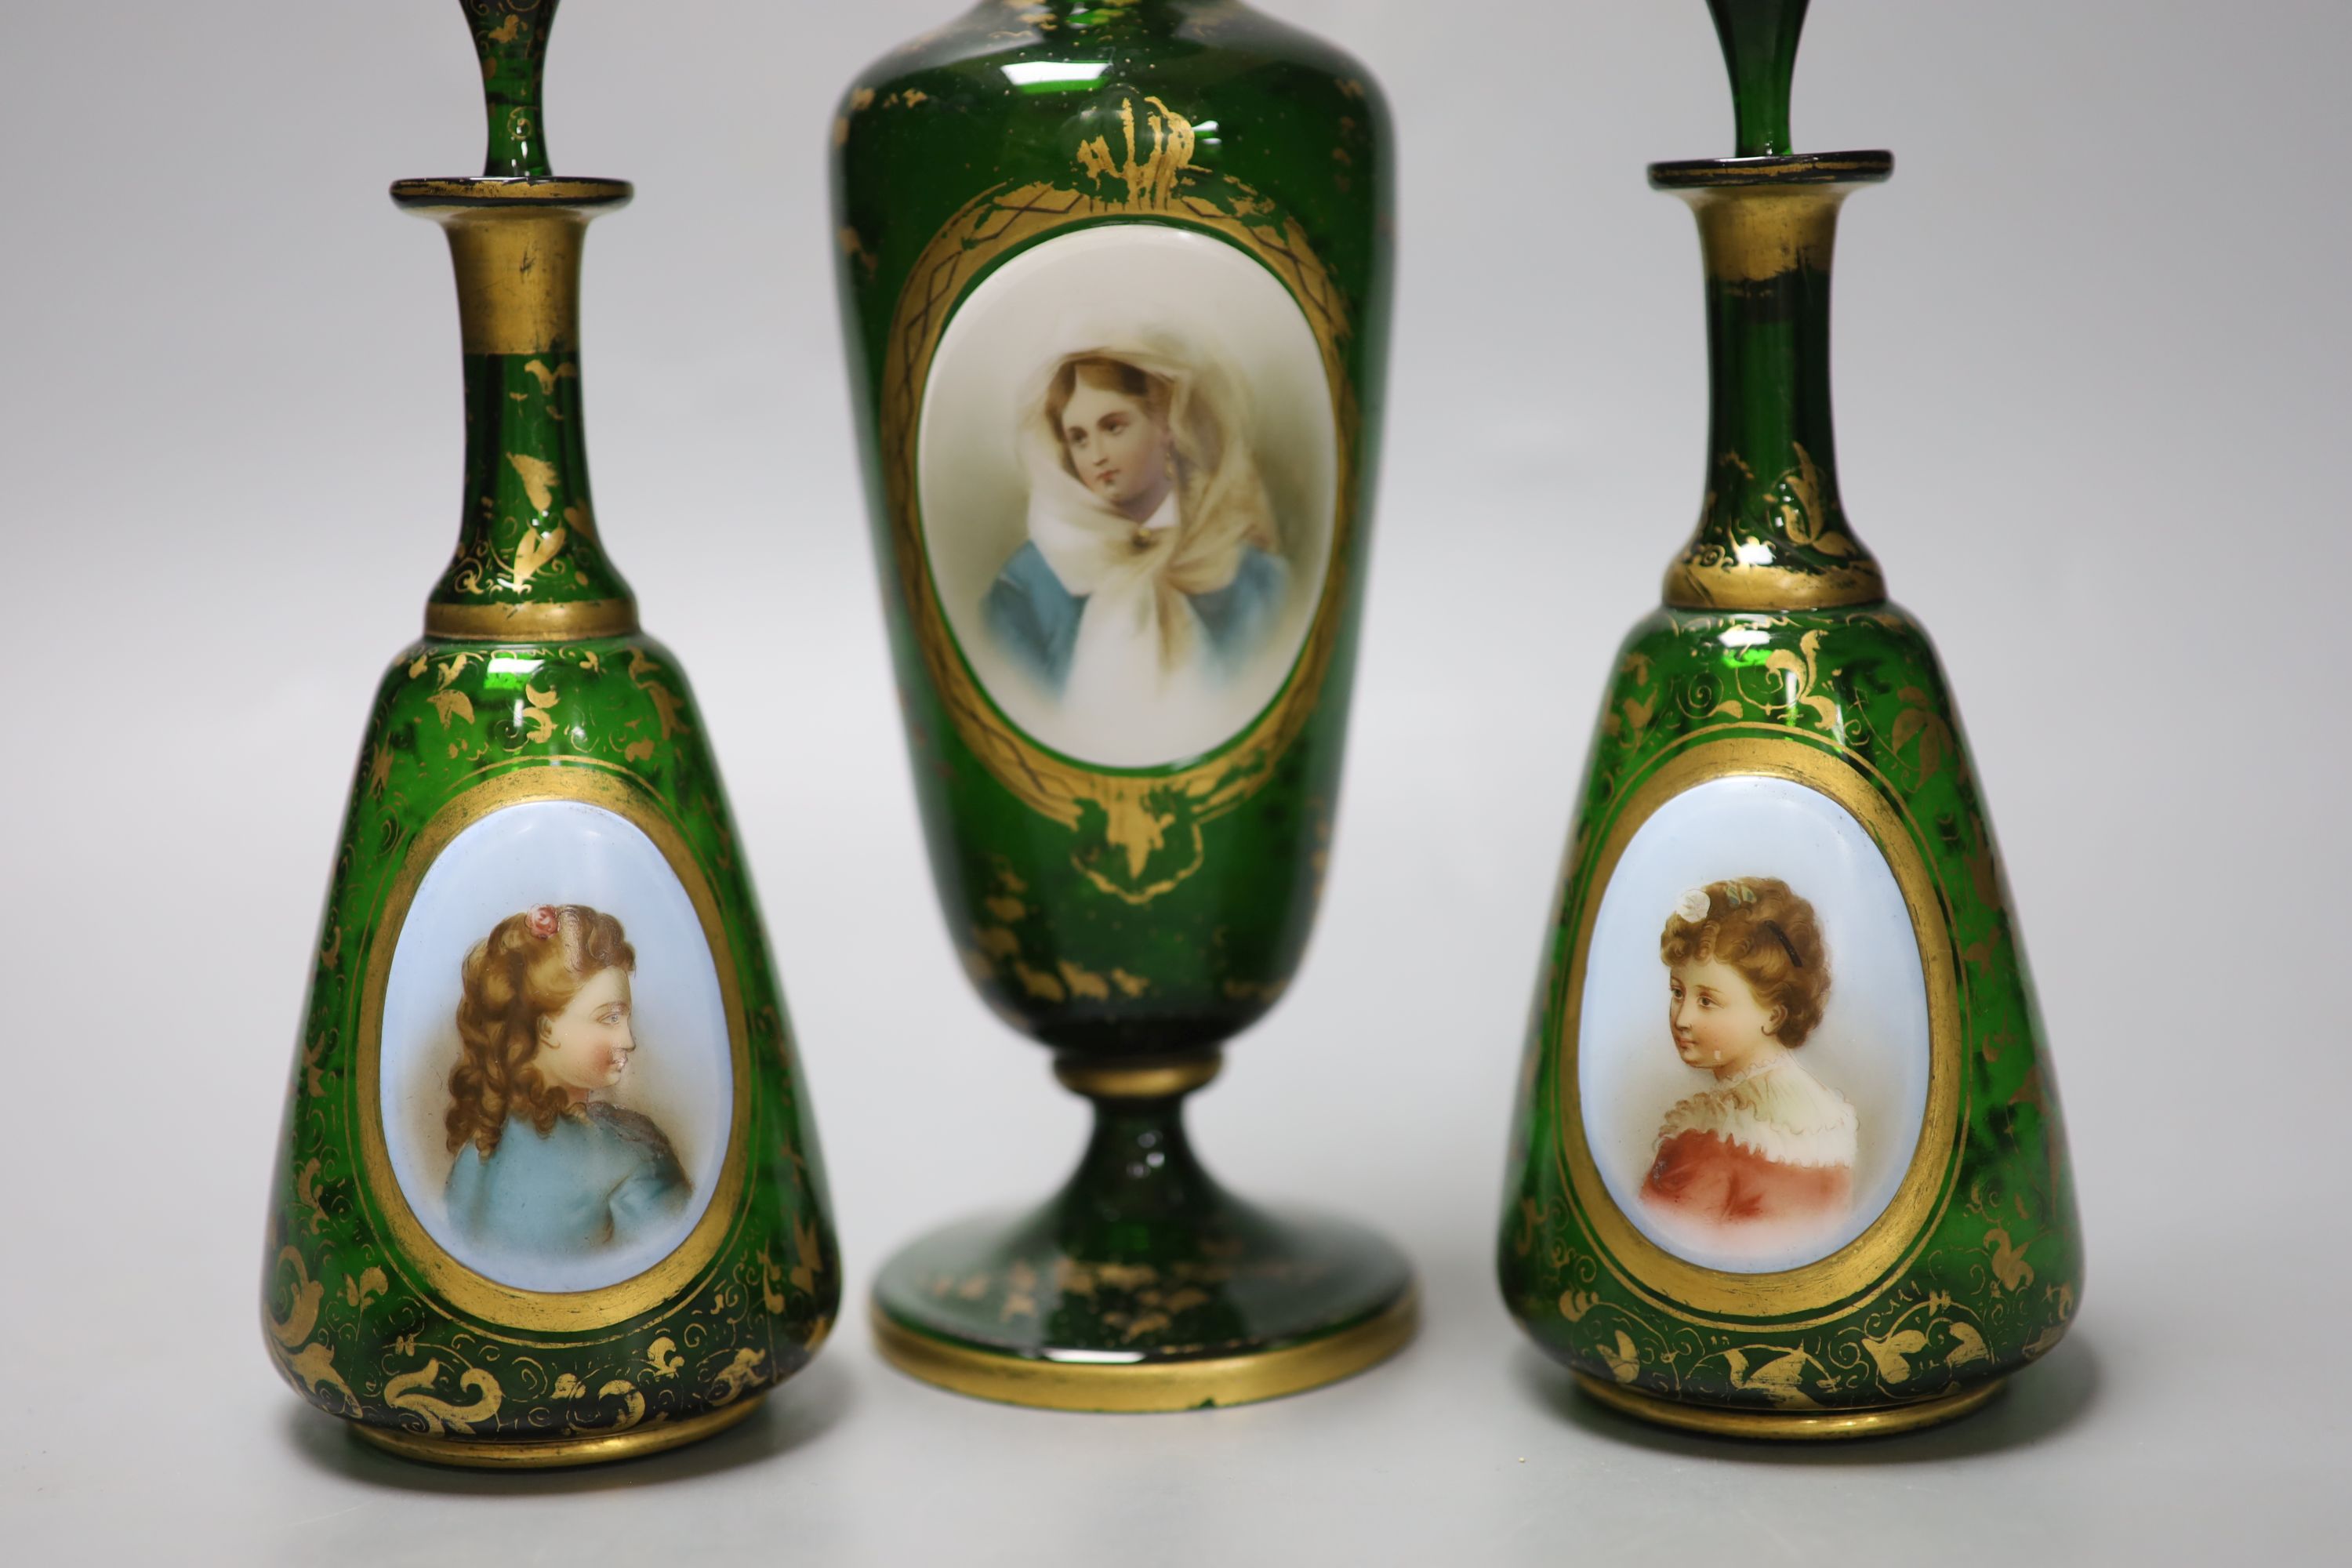 A Bohemian gilded glass vase with porcelain portrait plaque, late 19th century and a pair of similar - Image 2 of 6